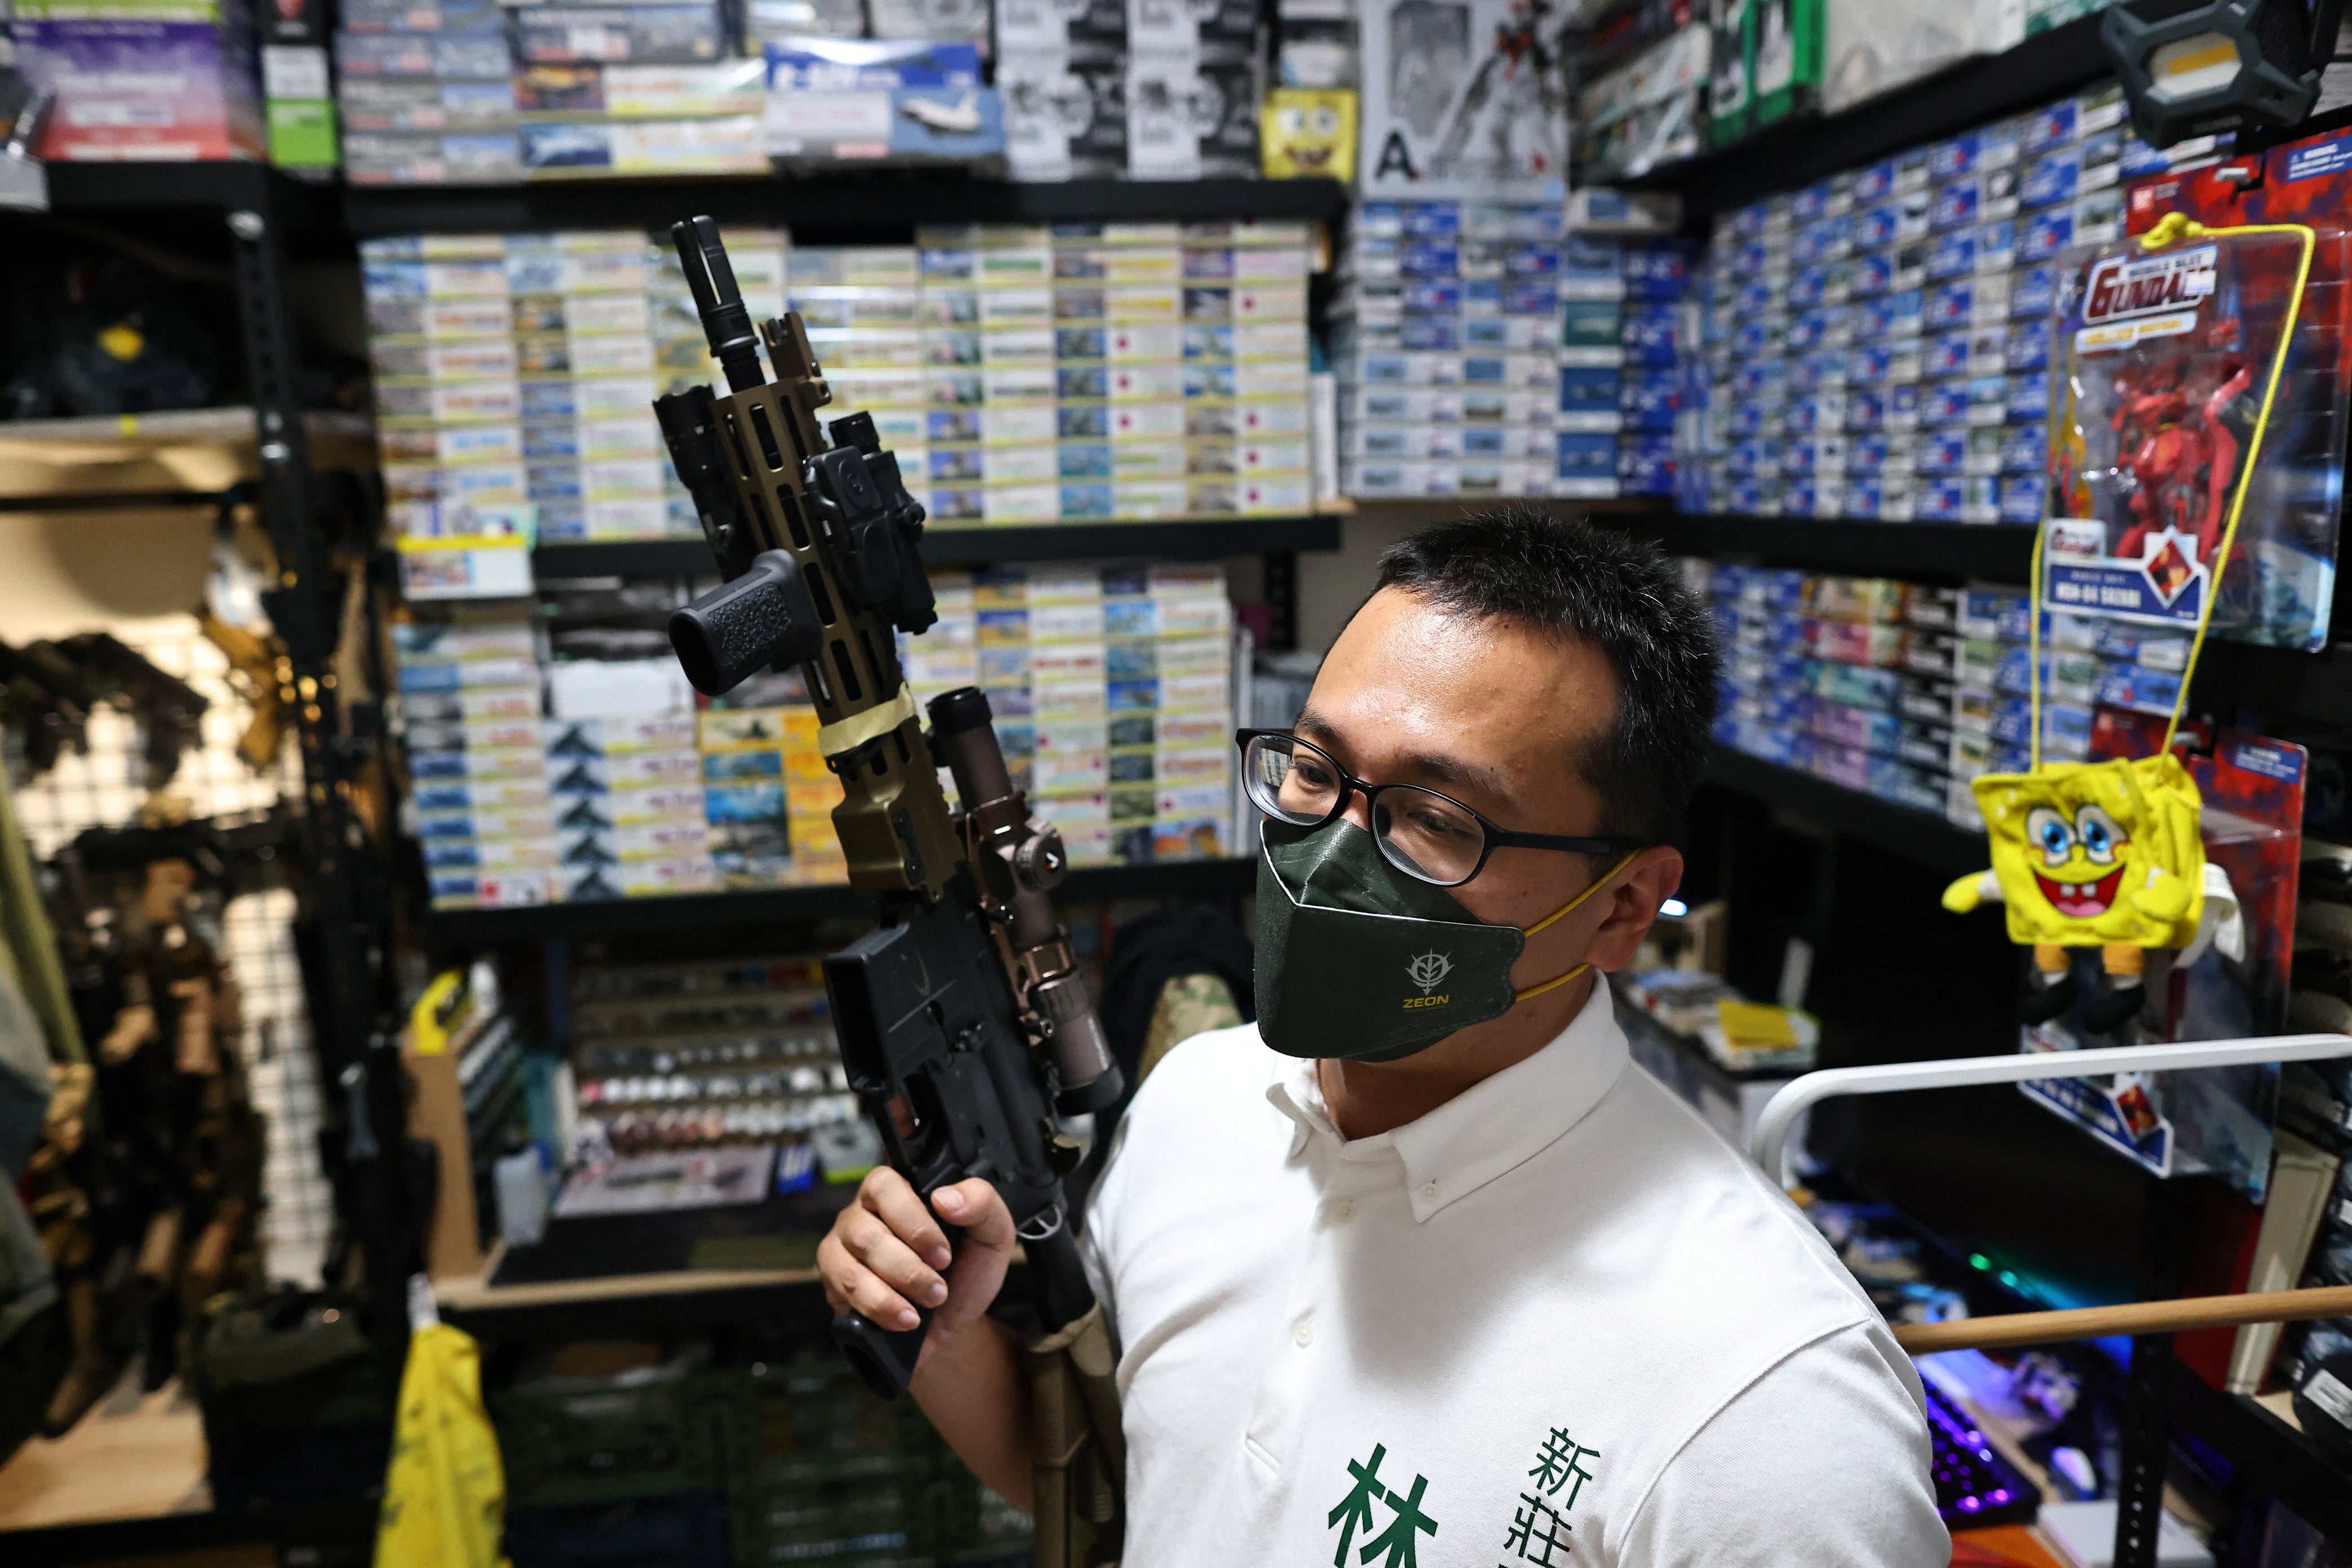 Lin Ping-yu, a politician for the ruling Democratic Progressive Party who is competing for a seat in the local council, displays of one of his 12 airsoft guns at his home in New Taipei City